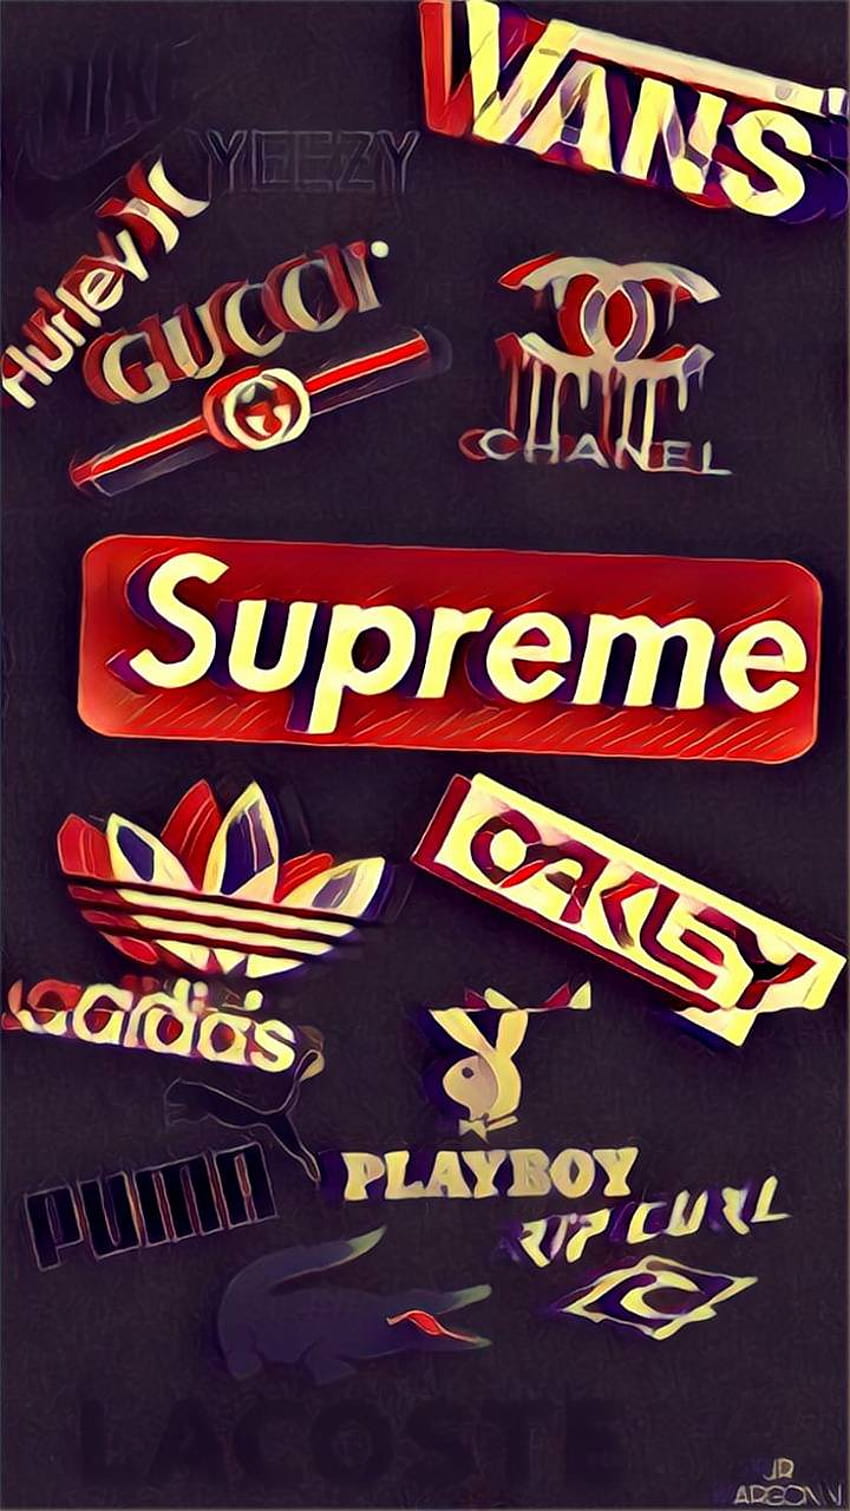 Supreme And Gucci Posted By Ethan Anderson - Gucci Supreme Louis